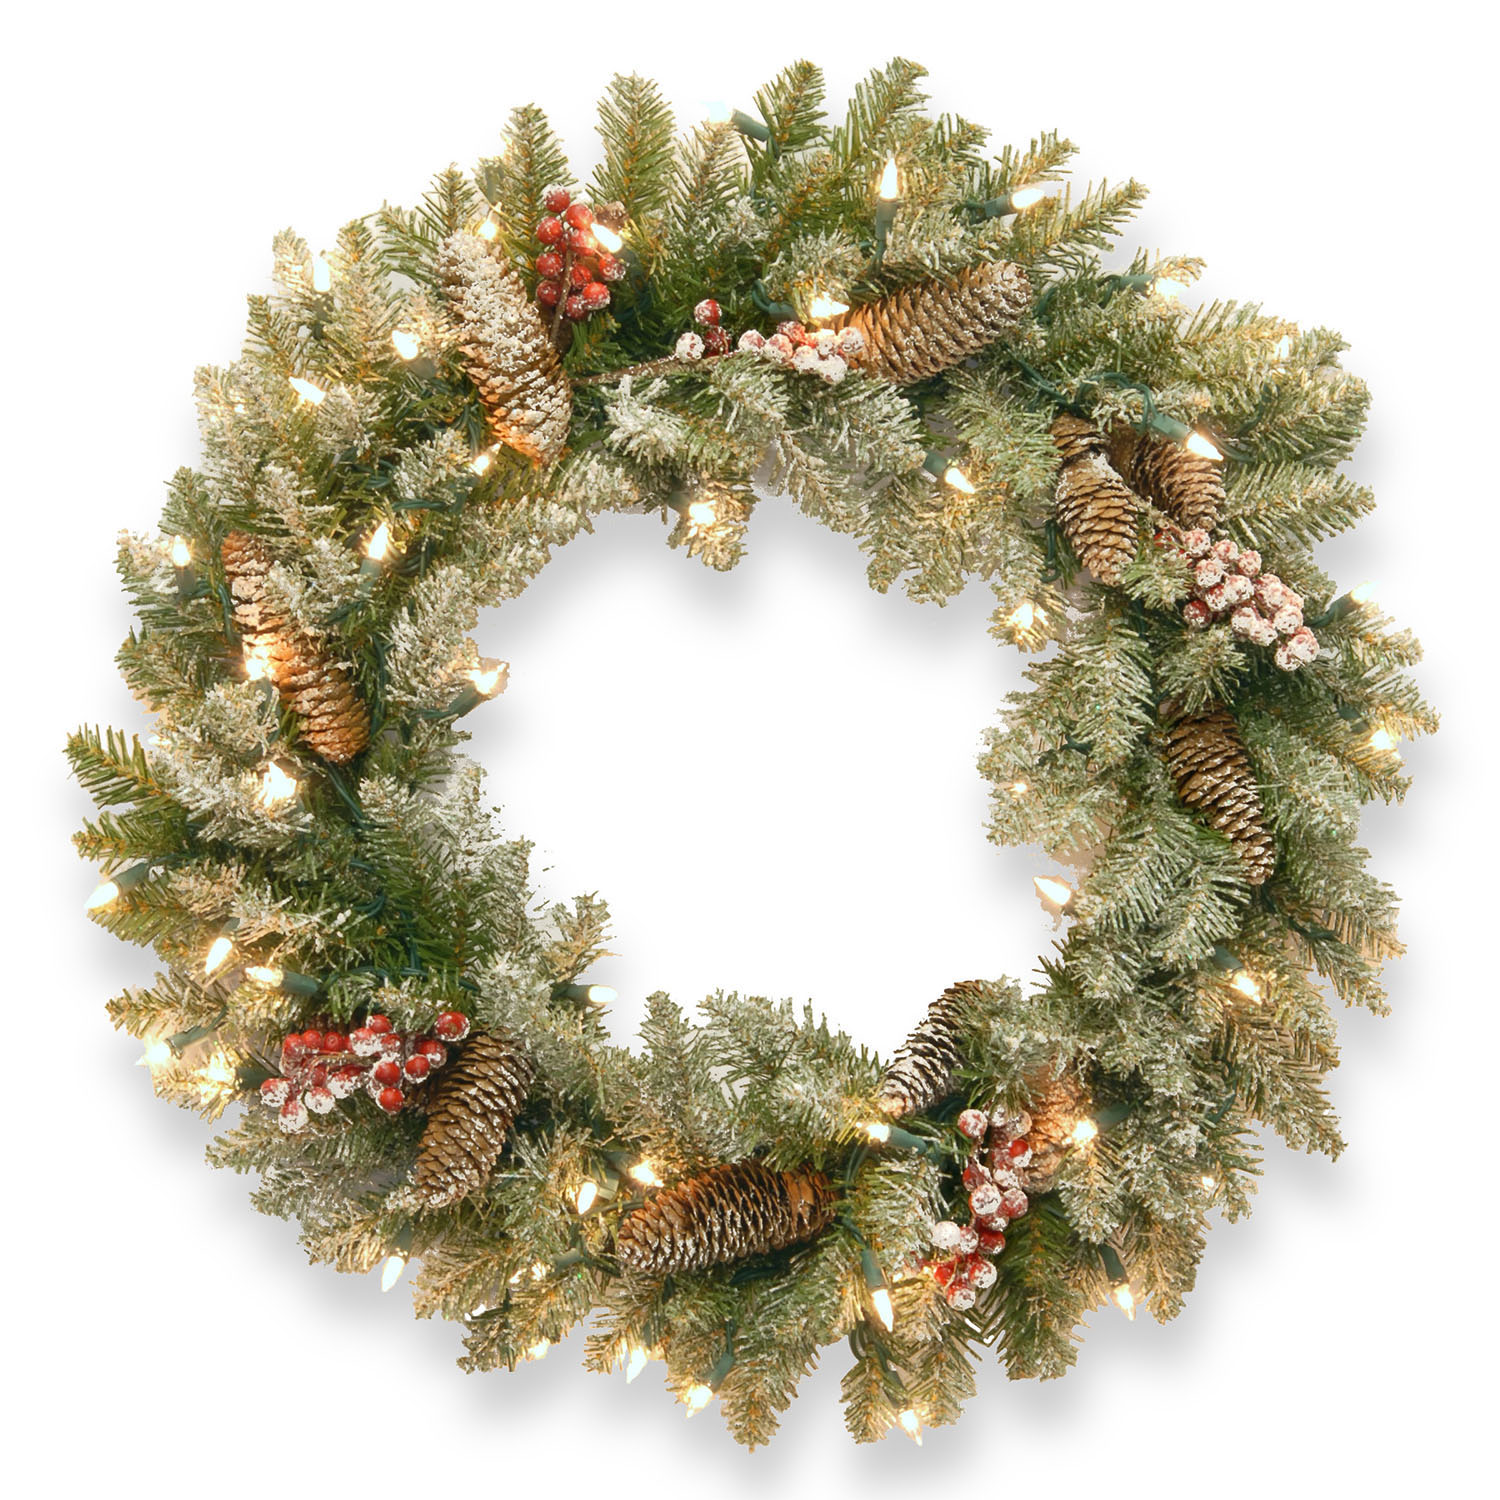 30 Inch Dunhill Fir Wreath: Snow, Red Berries, Cones & Clear Lights